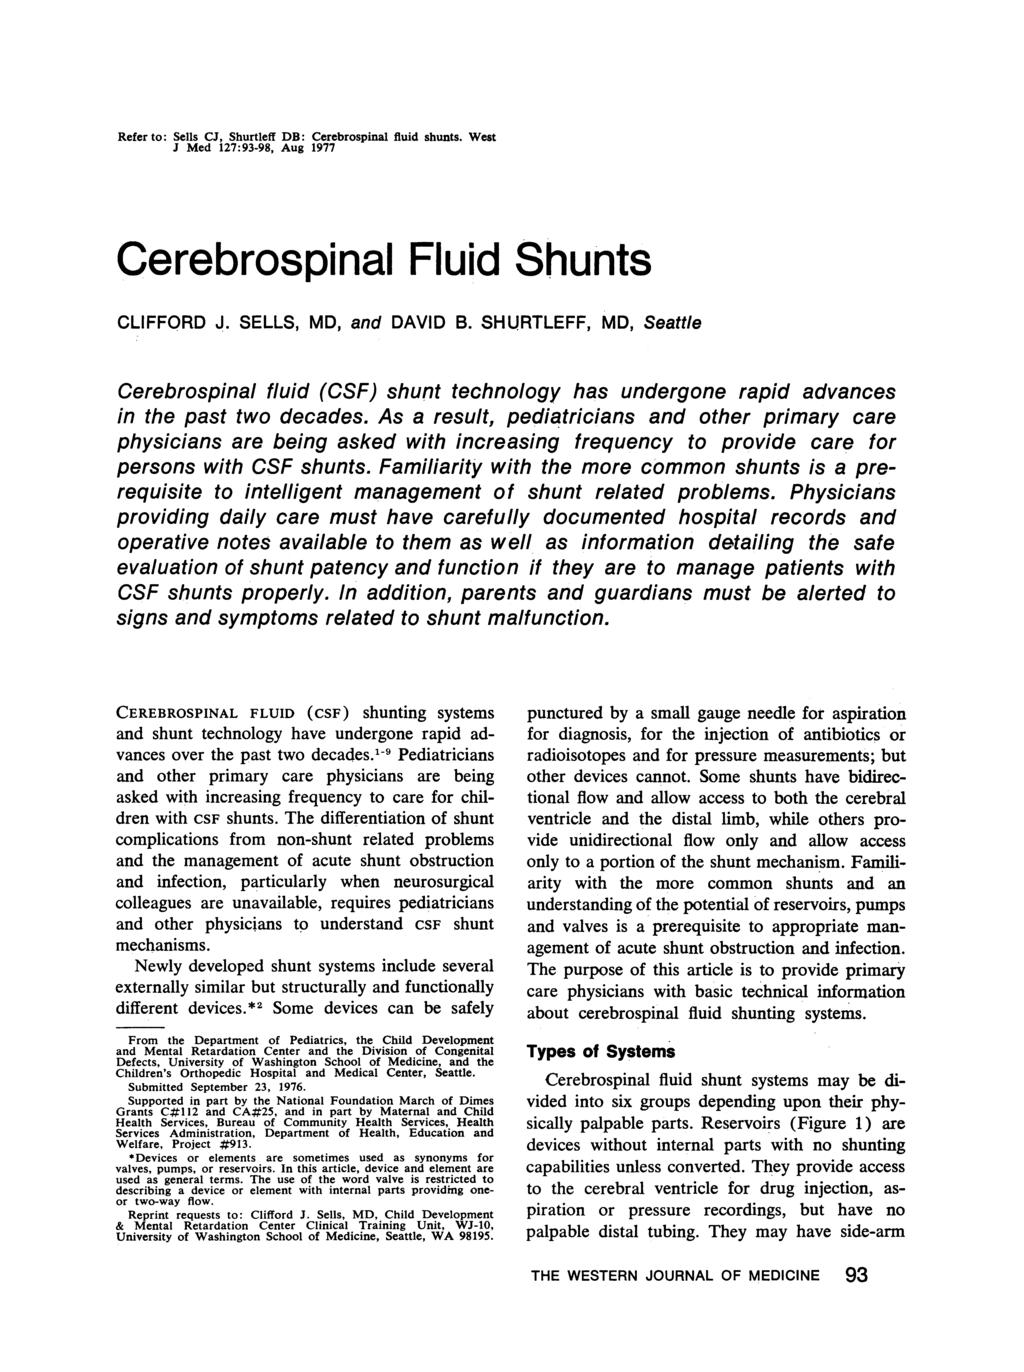 Refer to: Sells CJ, Shurtleff DB: Cerebrospinal fluid shunts. West J Med 127:93-98, Aug 1977 Cerebrospinal Fluid Shunts CLIFFORD J. SELLS, MD, and DAVID B.